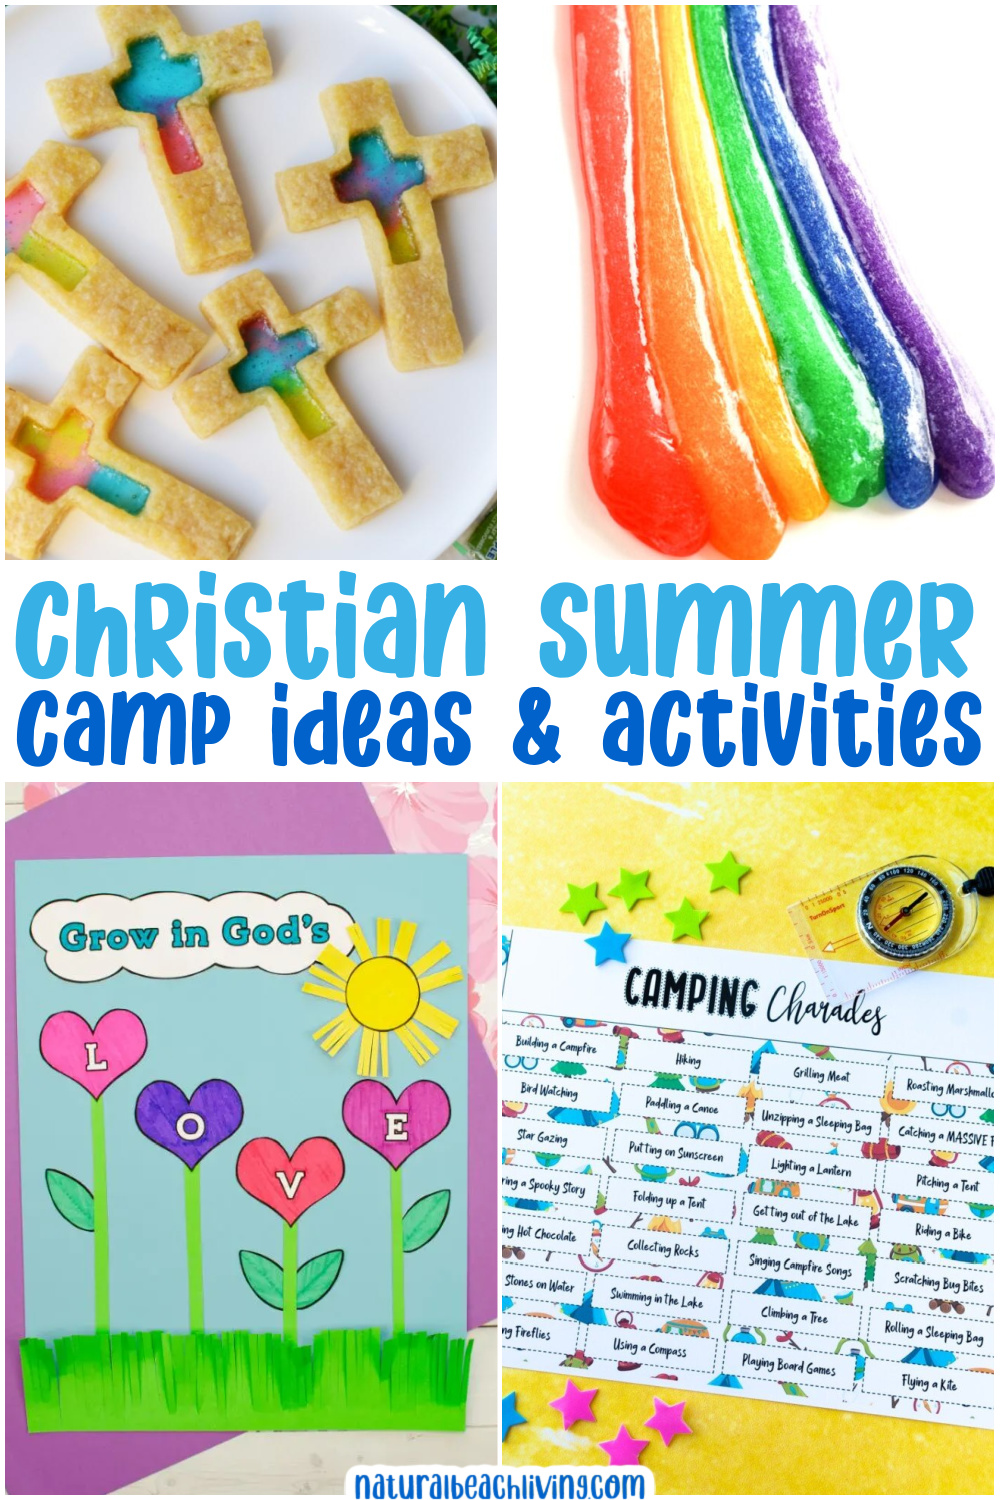 If you're looking for some great Christian Summer Camp Themes you've come to the right place! We have a variety of fun and faith-focused ideas that will engage and delight your campers. From Christian crafts and snacks to Bible games and activities, we have everything you need to create an amazing summer camp experience. 